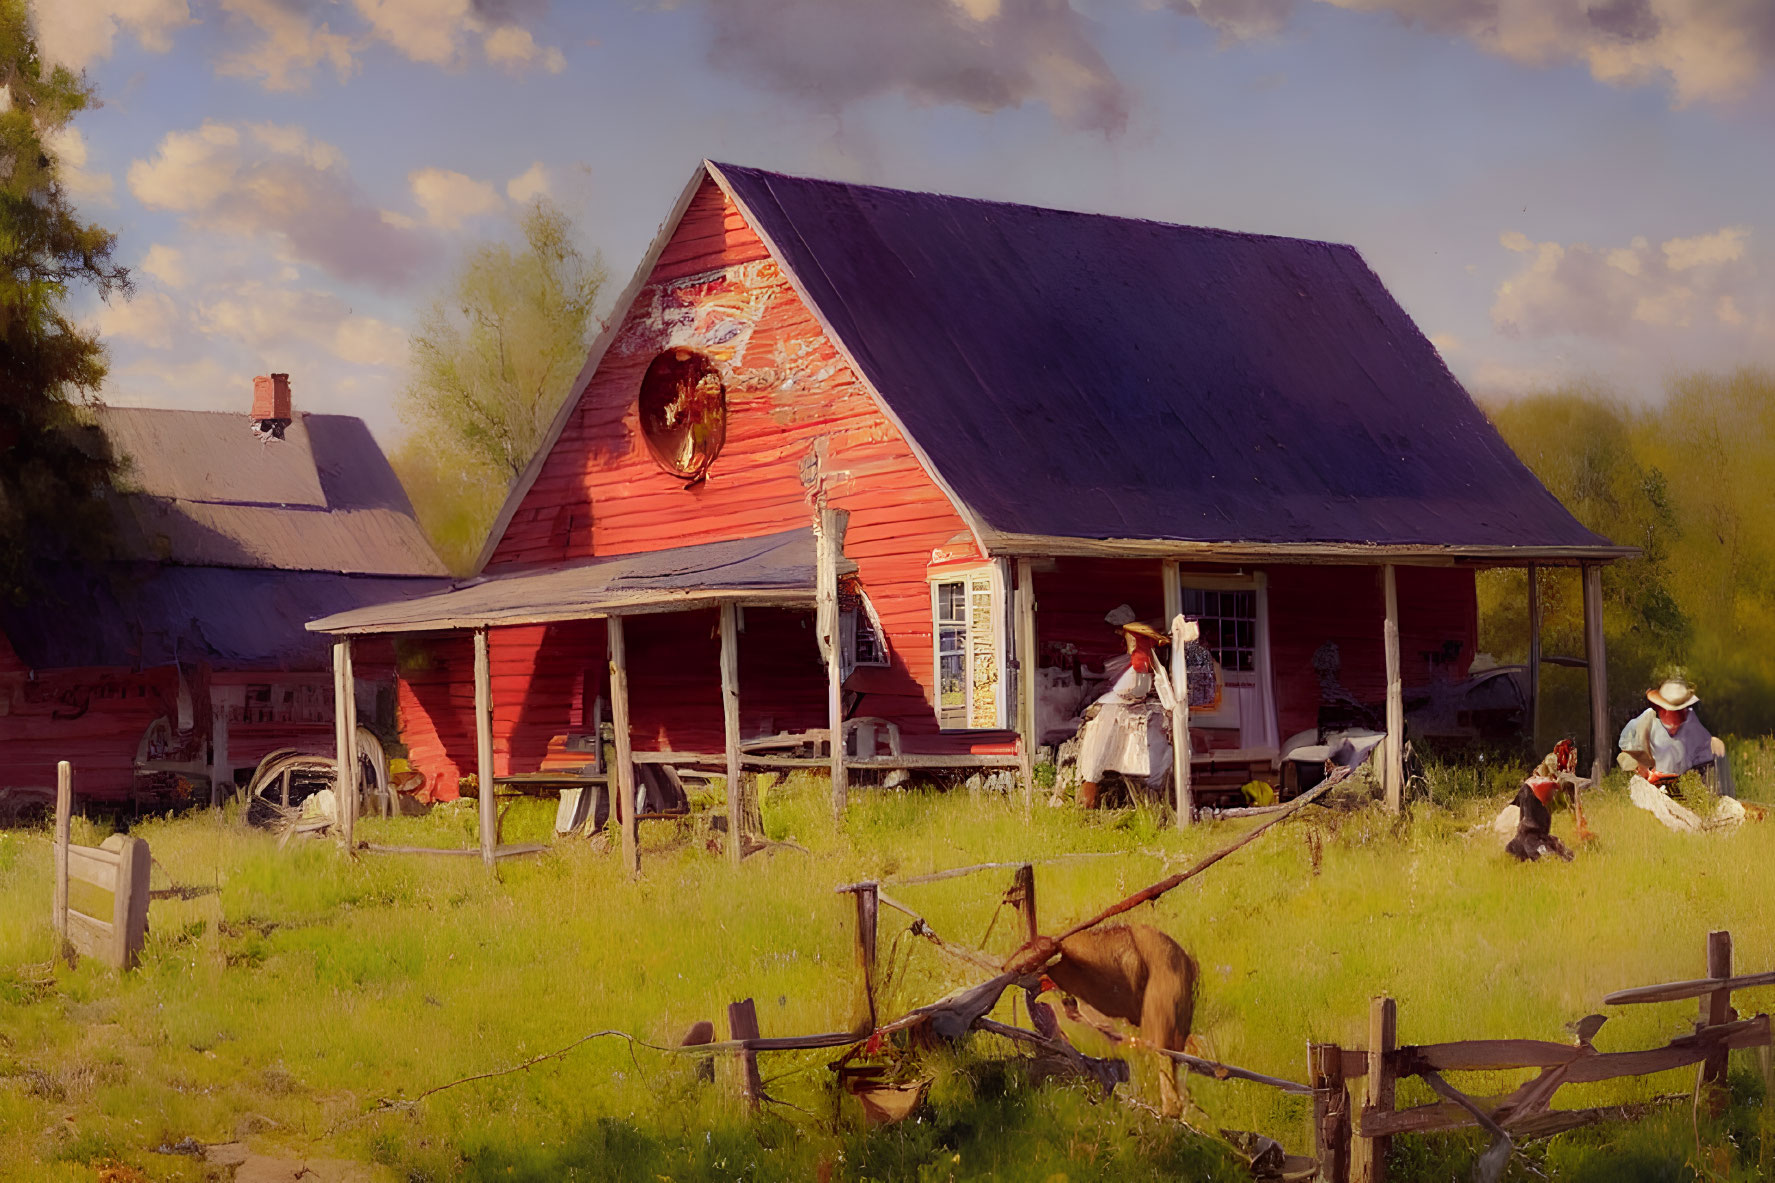 Vintage farm scene with red barn, people in old-fashioned attire, and blue sky.